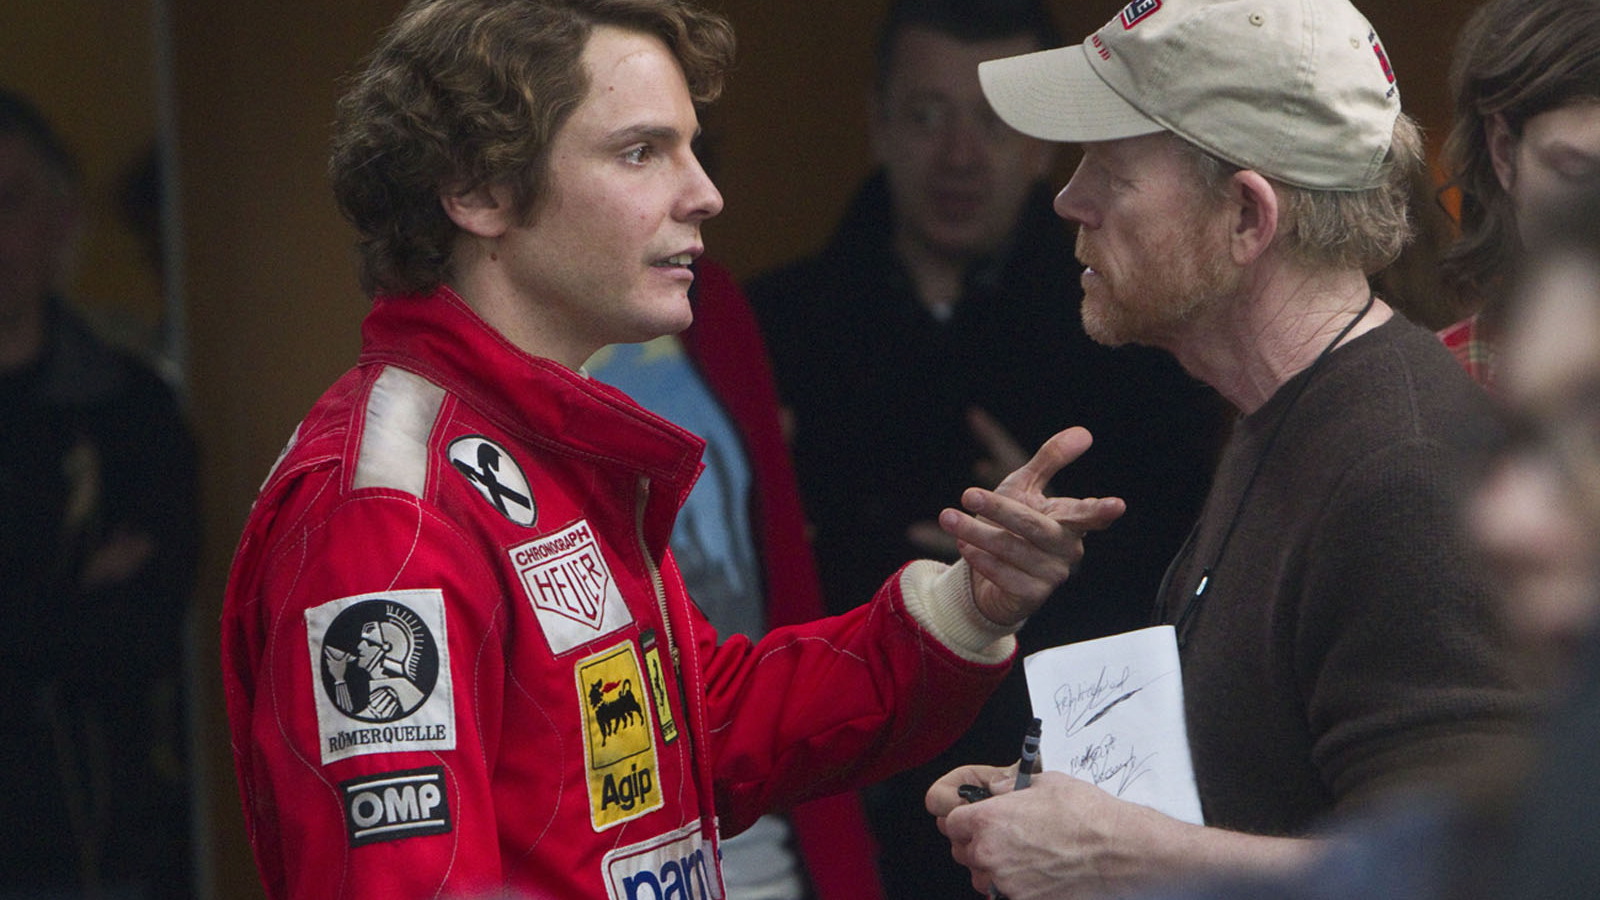  Official images from Niki Lauda Biopic ‘Rush’